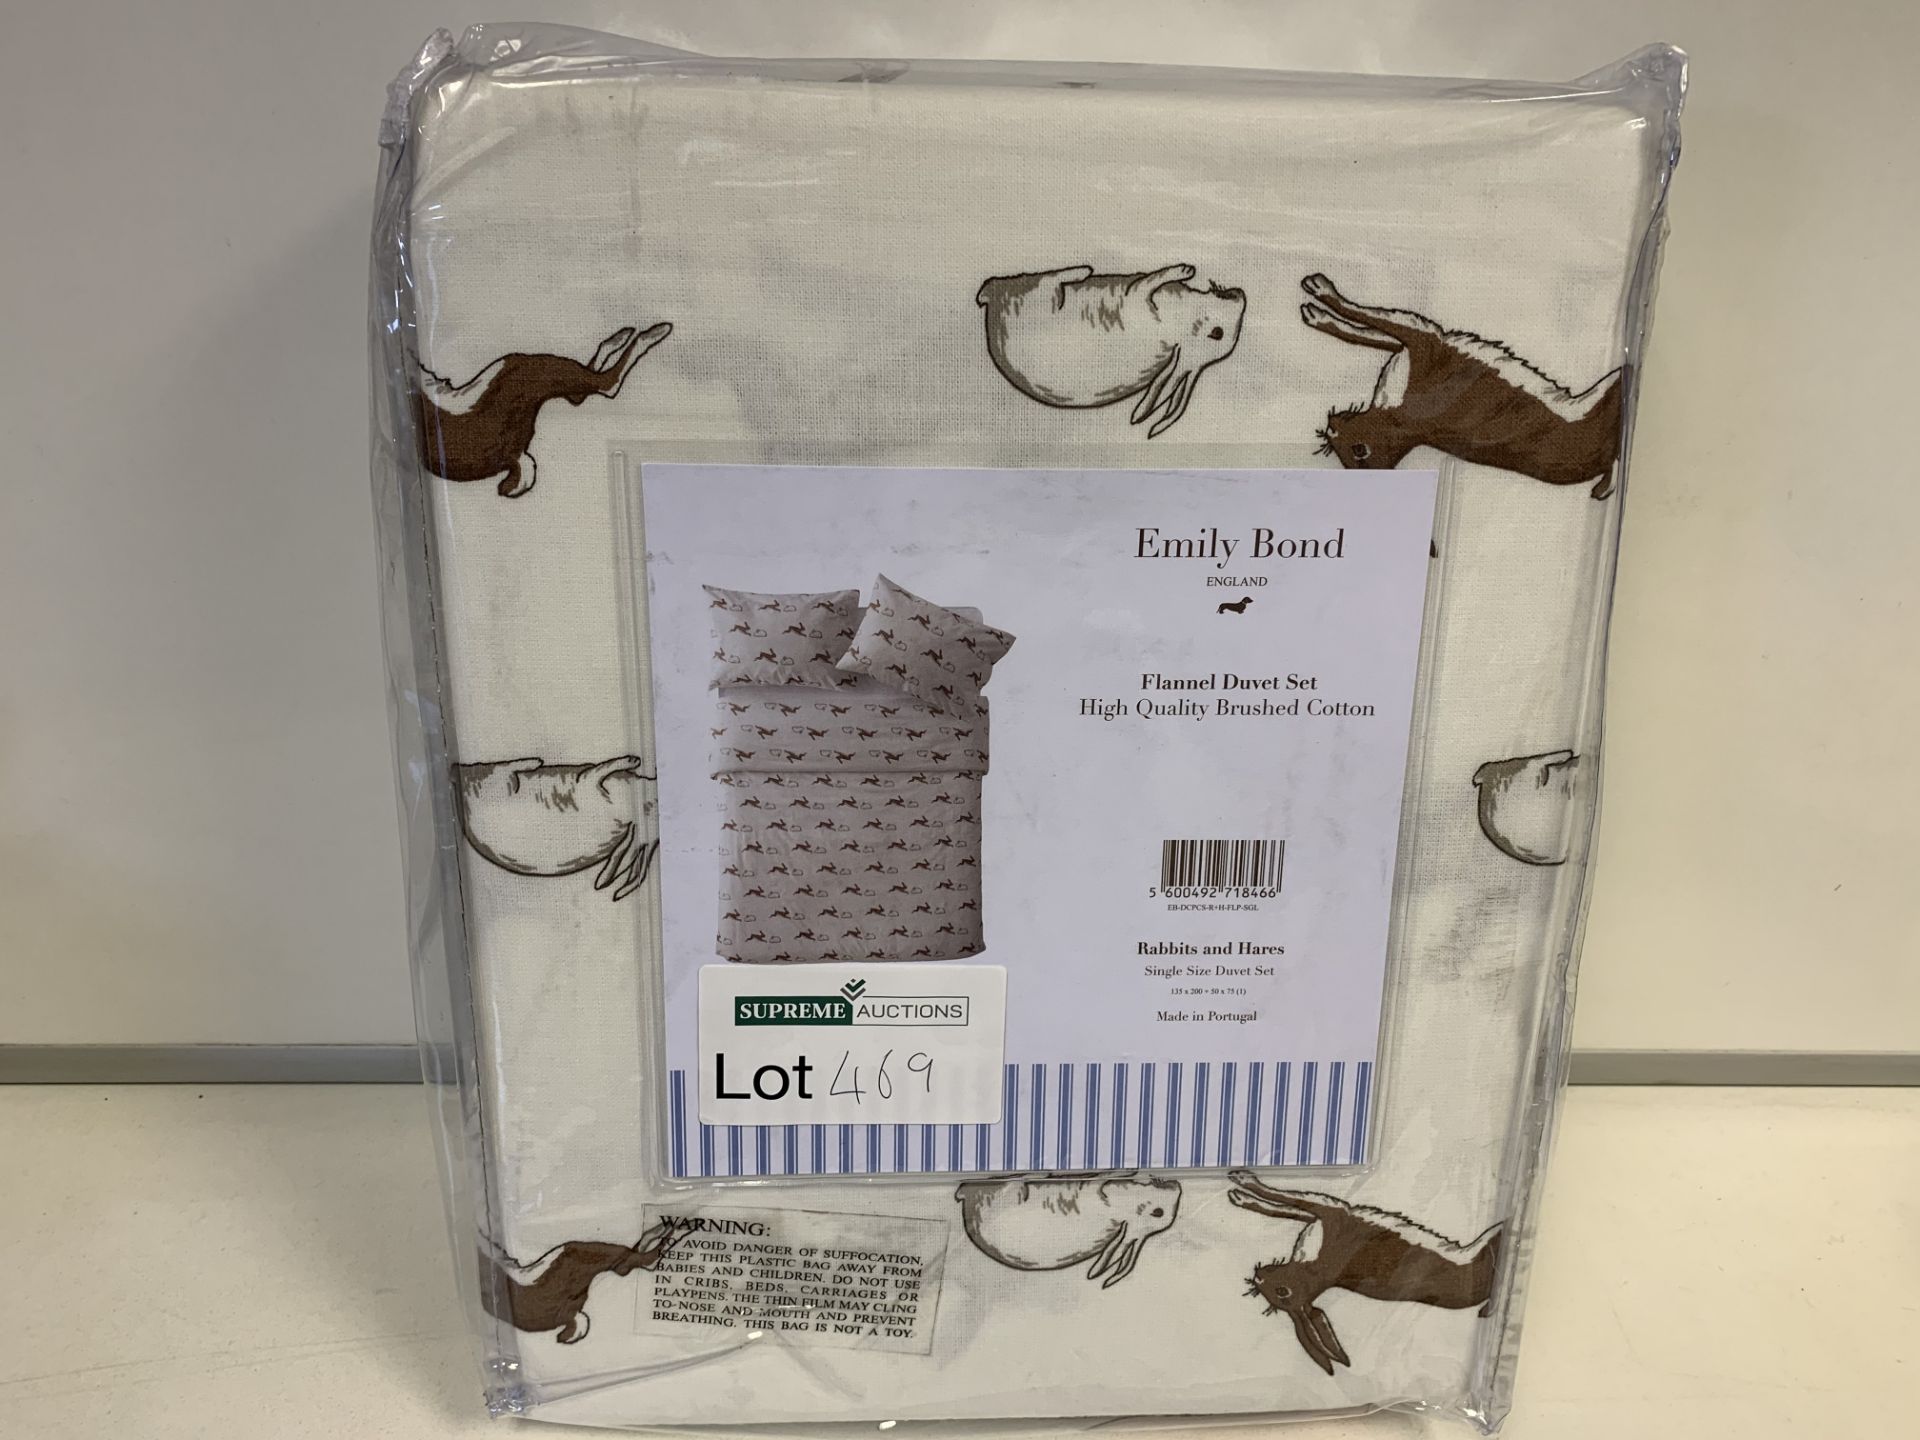 3 X BRAND NEW EMILY BOND DOUBLE SIZE DUVET SETS RABBIT AND HARE STYLE RRP £100 EACH